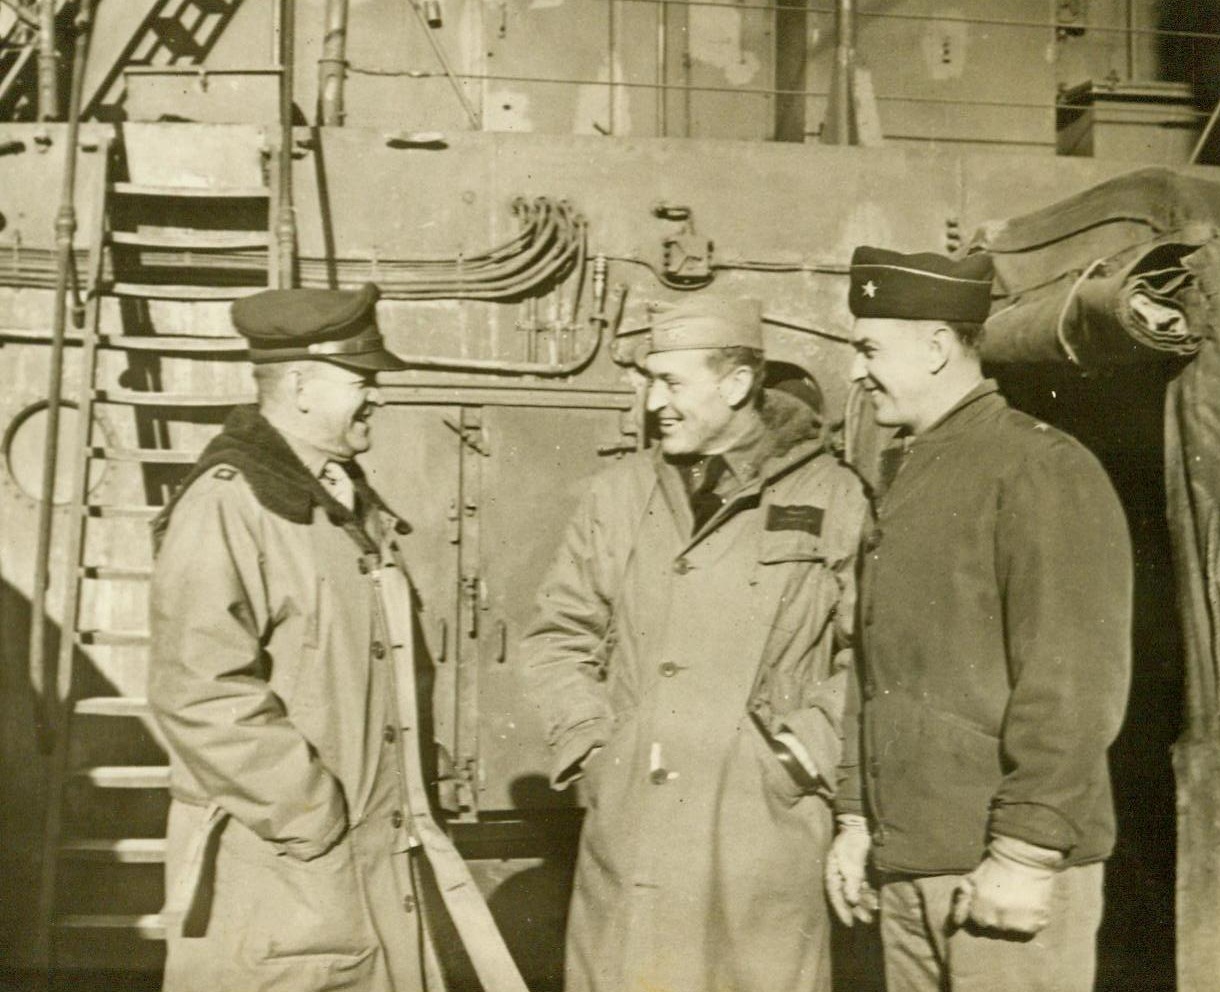 Task Force Commander and Observers, 3/2/1944. Somewhere in the Pacific— Aboard the flagship of a U.S. Naval task force which bombarded Paramushiro, Nipponese Kurile Islands Naval Base, early last February, are (LtR): Maj. Gen. Davenport Johnson, Commander with USAAF, based in Alaska; Rear Adm. Wilder D. Baker, Task Force Commander; And Brig. Gen. E. D. Post, Chief of Staff, Army Alaska Department. The two Army officers accompanied the force as observers. 3/2/44 (ACME);